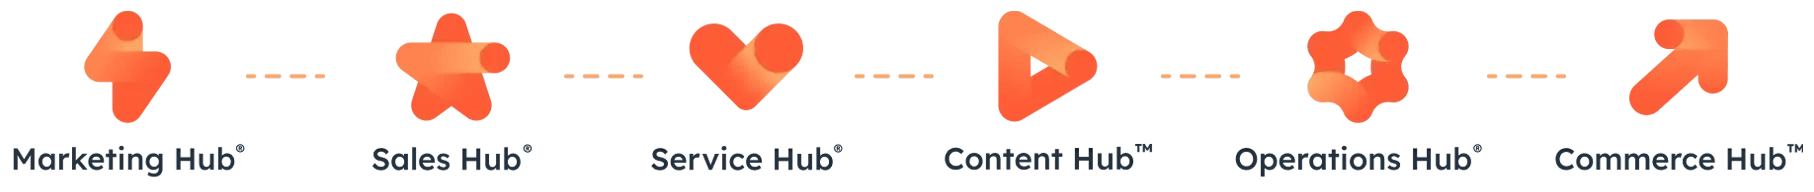 Graphic stating the different hubs available in HubSpot: Marketing, Sales, Service, Content, Operations, and Commerce Hubs